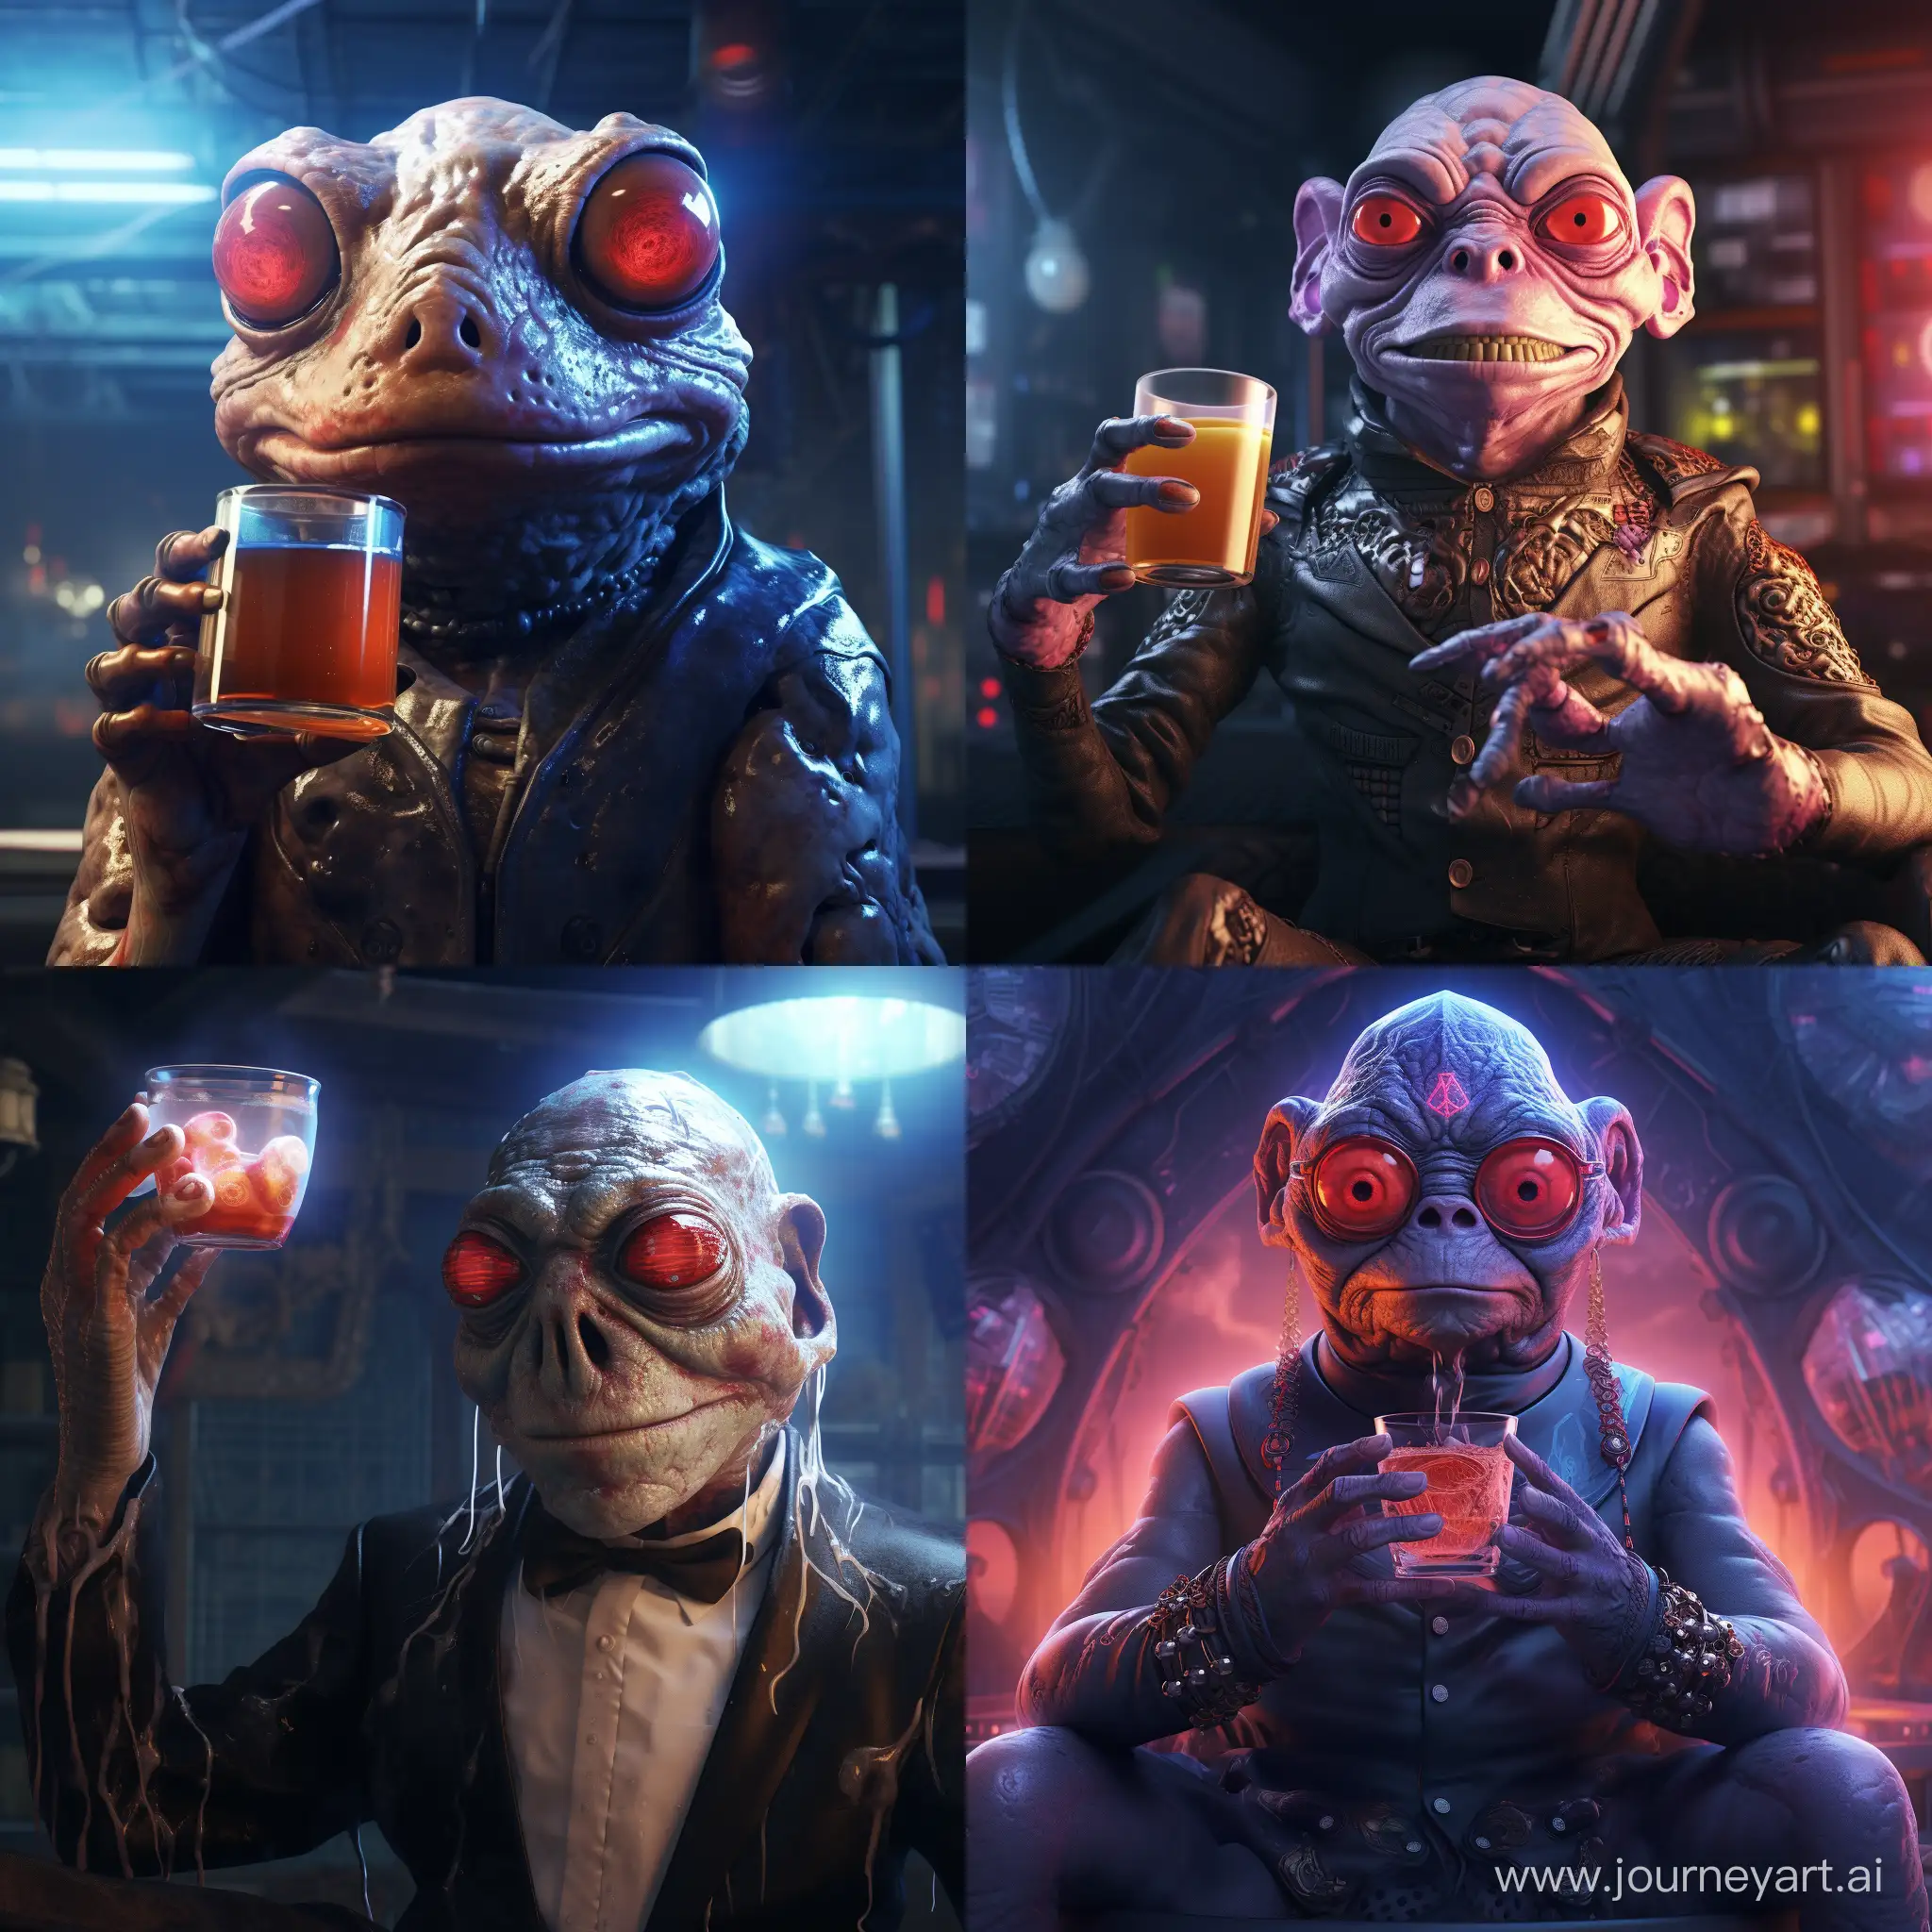 Evil demonic AI god Satanic frog holding a glass of milk above a human brain, super advanced technology, futuristic, hyper digital background, extremely detailed and realistic, ominous and eery.